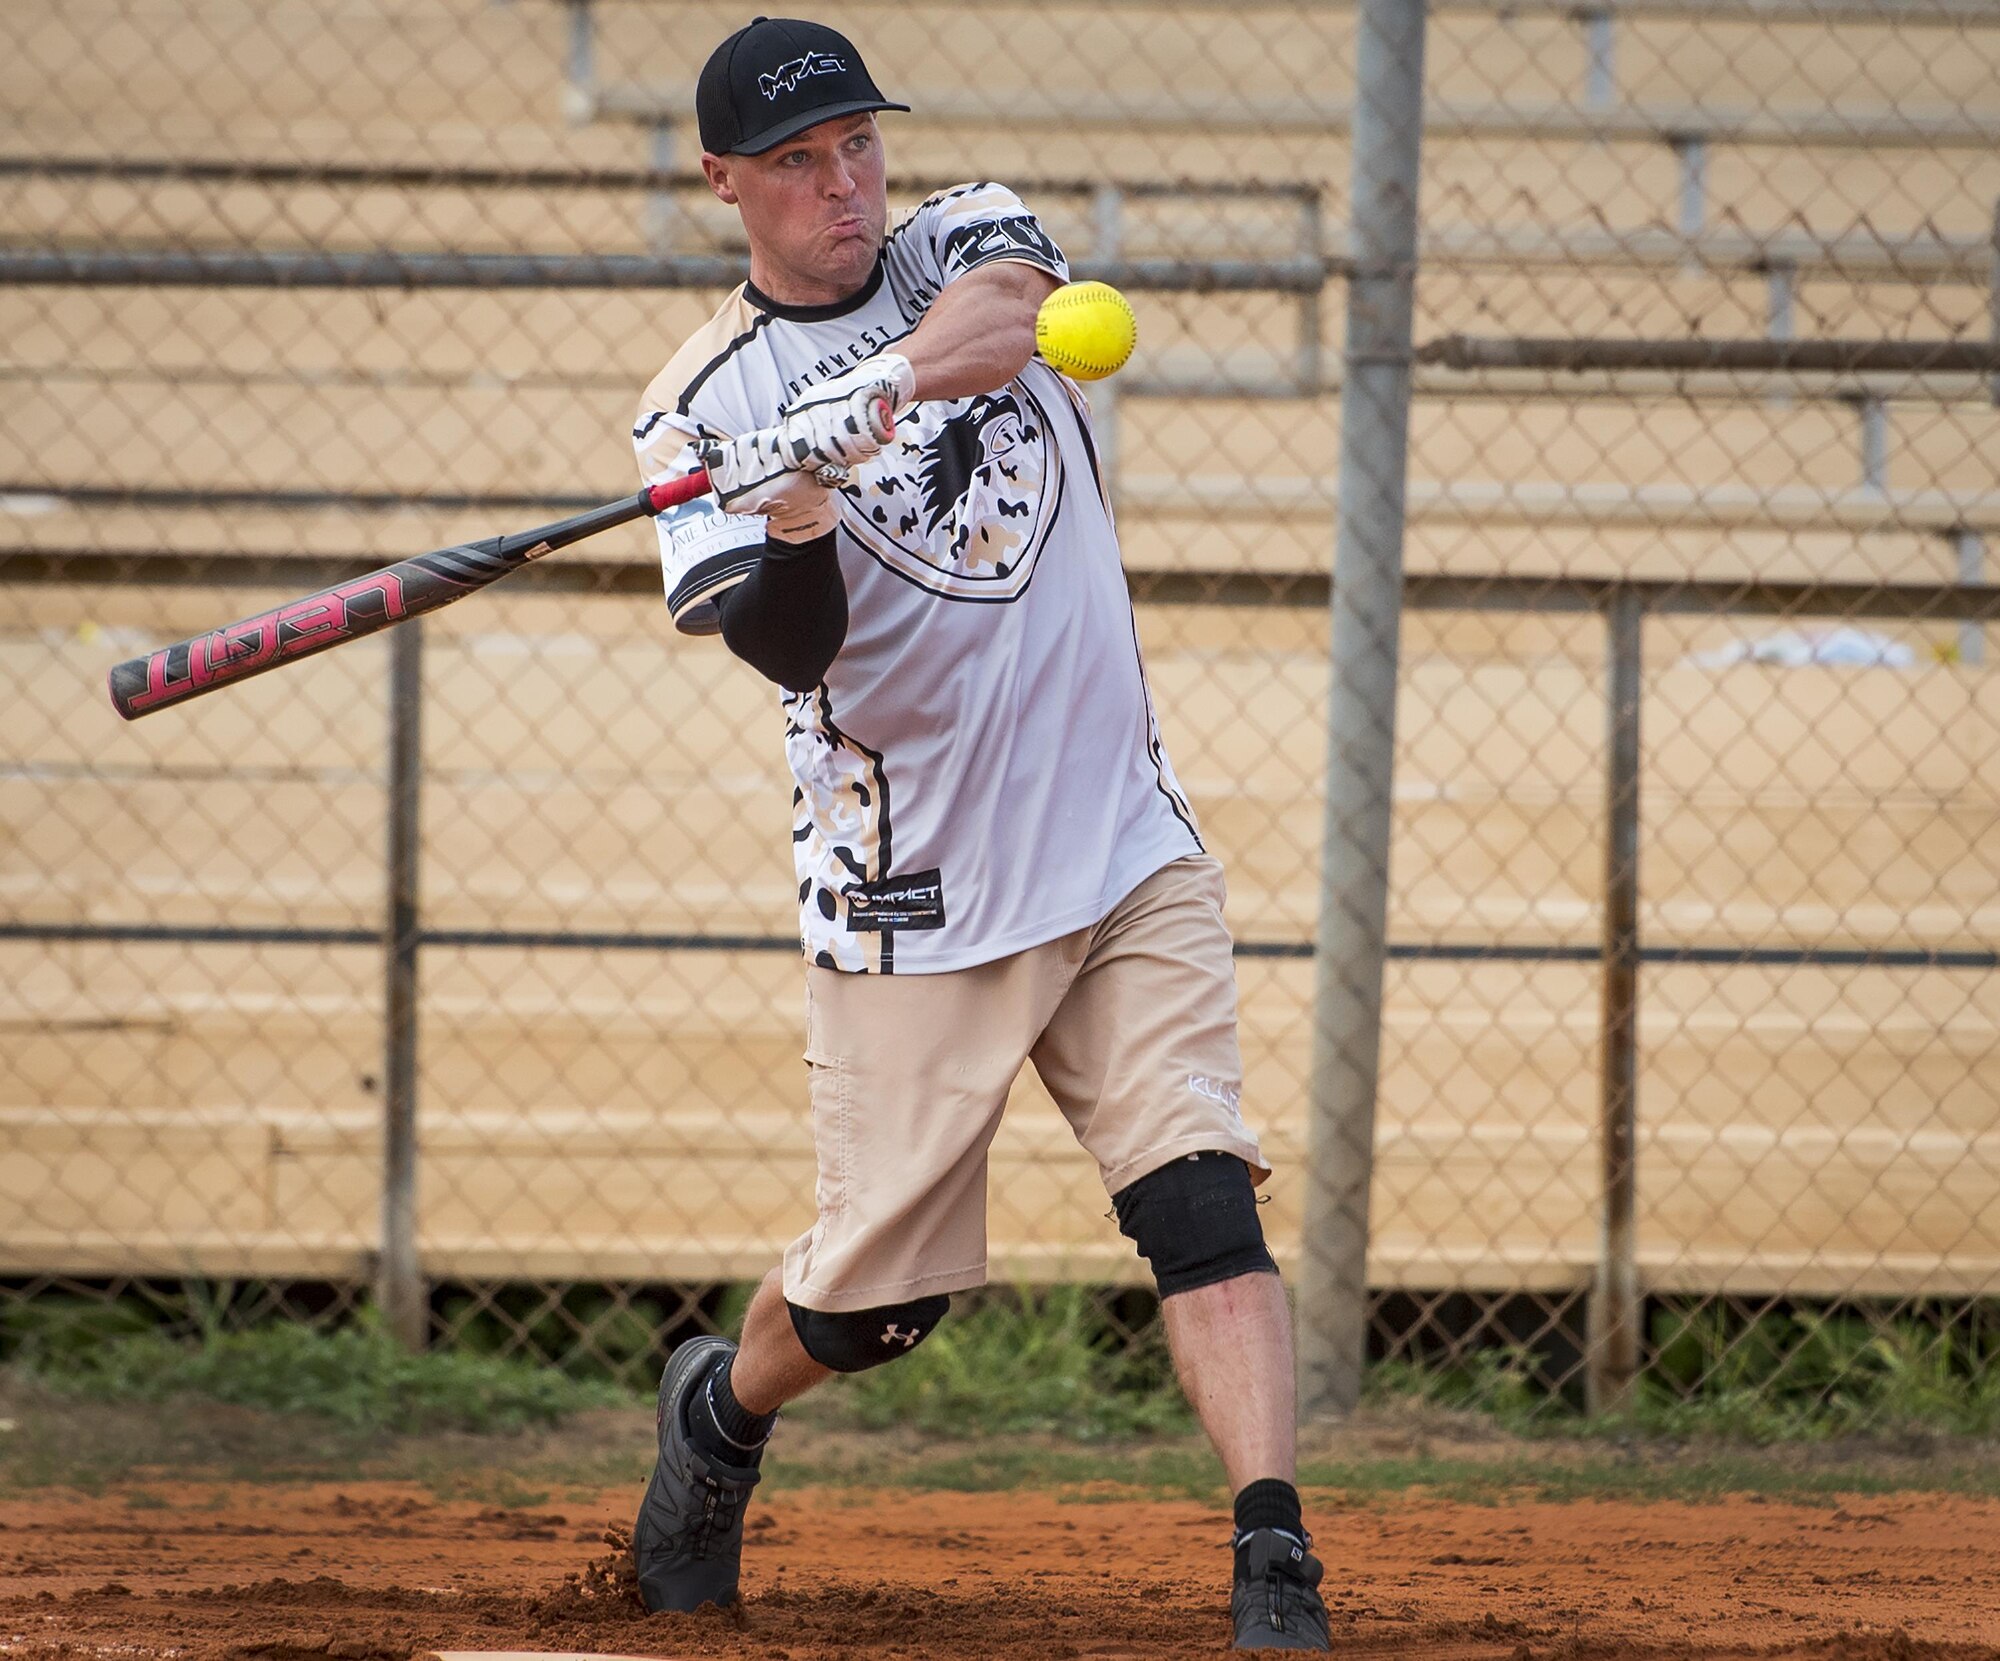 George Adams, 359th Training Squadron softball team, swings for the fences during an intramural game against the 96th Maintenance Squadron team July 17 at Eglin Air Force Base, Fla.  The league-leading Maintainers pounded the training squadron 10-5 to improve to 9-1 on the season.  (U.S. Air Force photo/Samuel King Jr.)